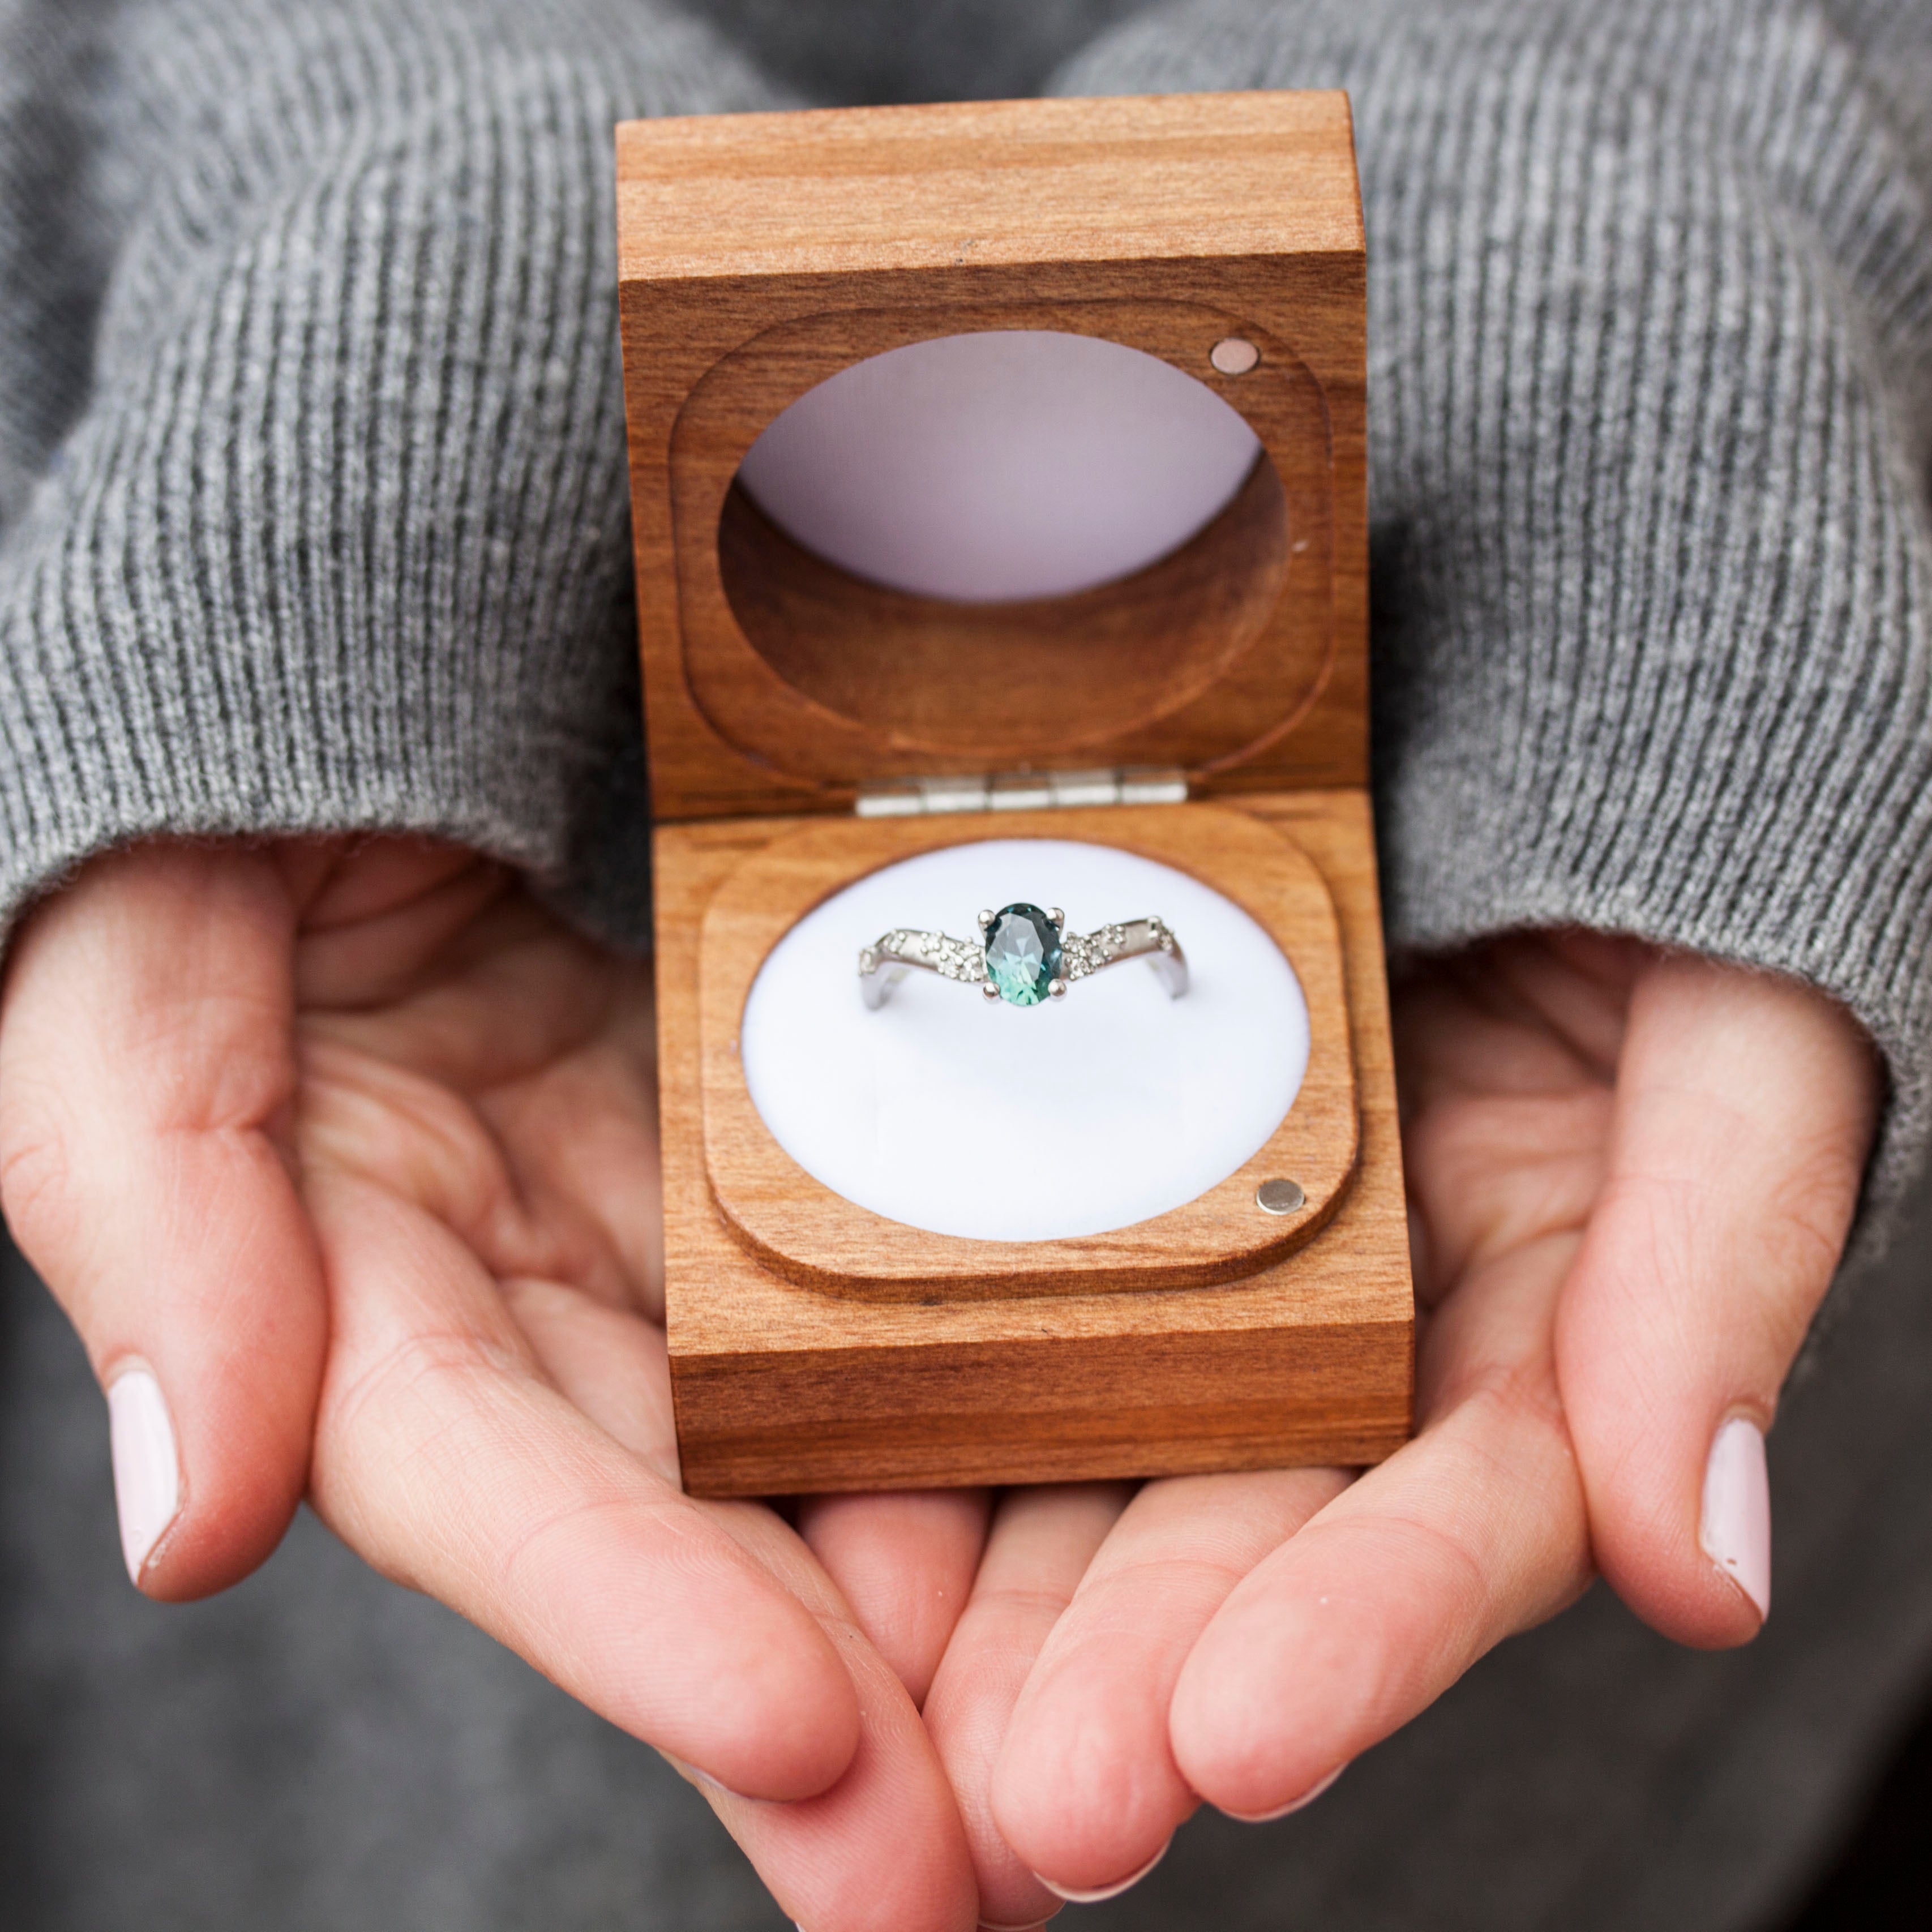 Wooden Ring Box with sapphire ring, held in hands